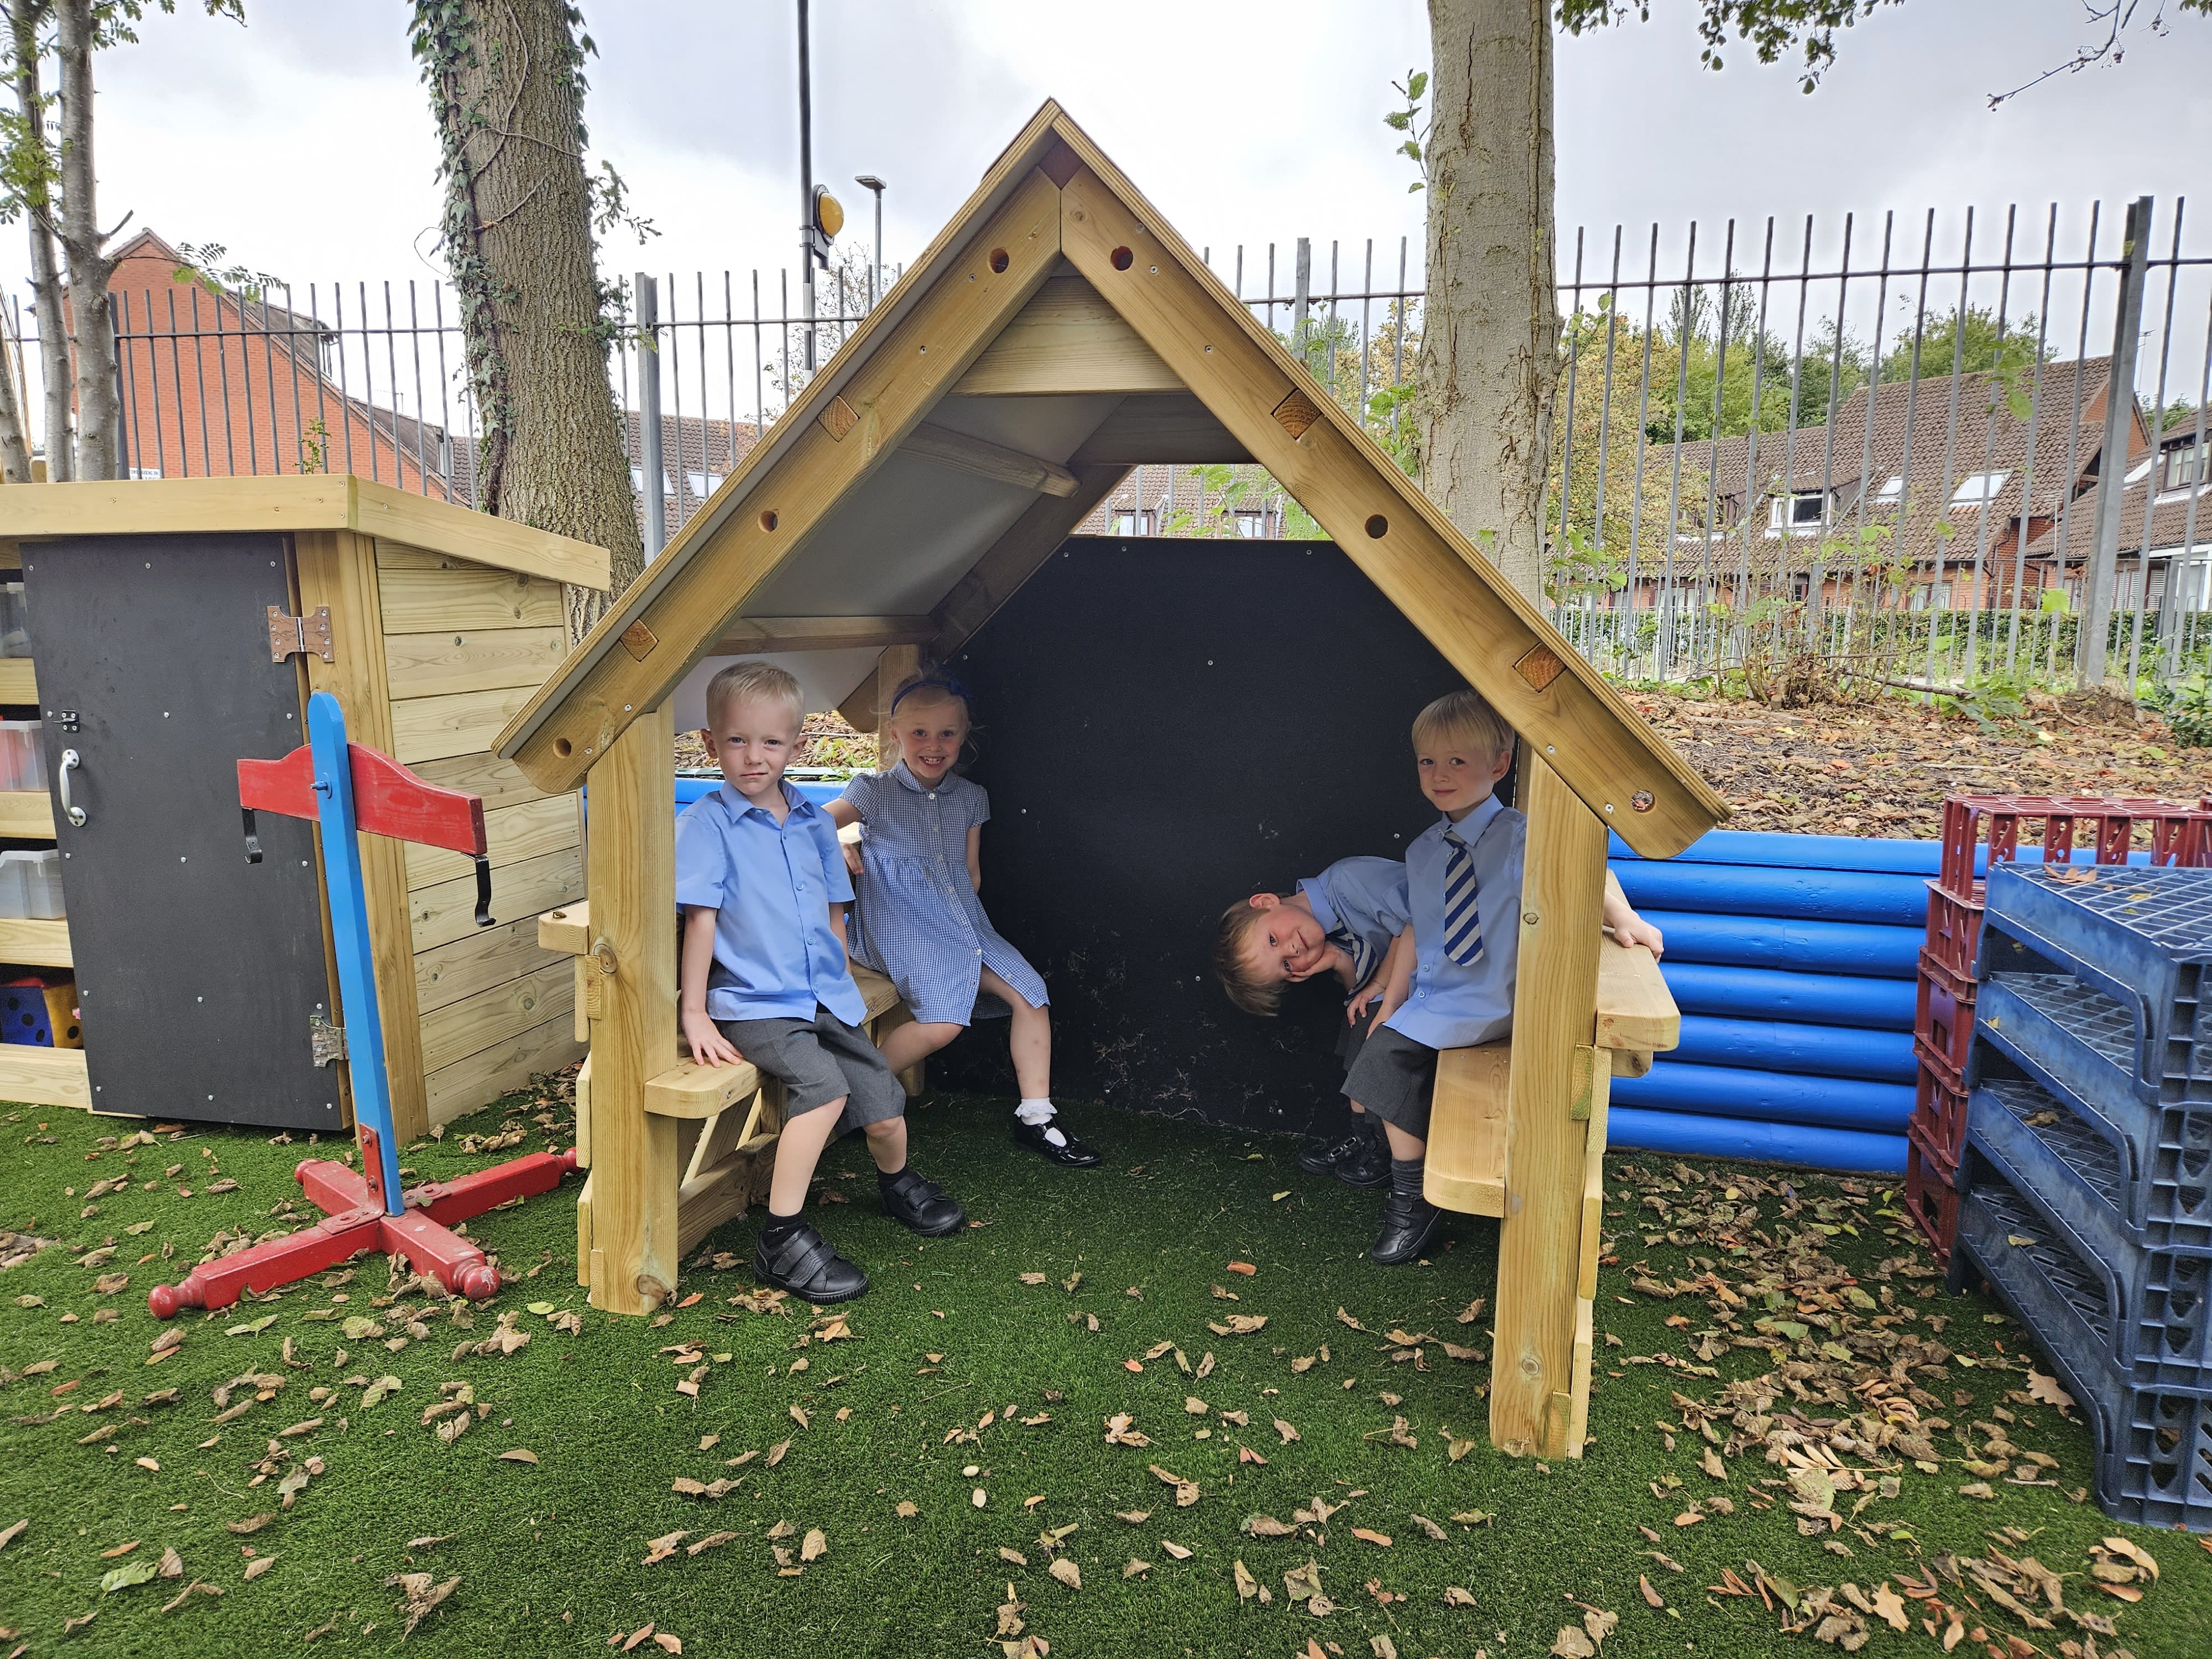 4 children are sat inside the Pentagon Small Playhouse as they look at the camera, smiling. The small playhouse allows the children to play and have fun.